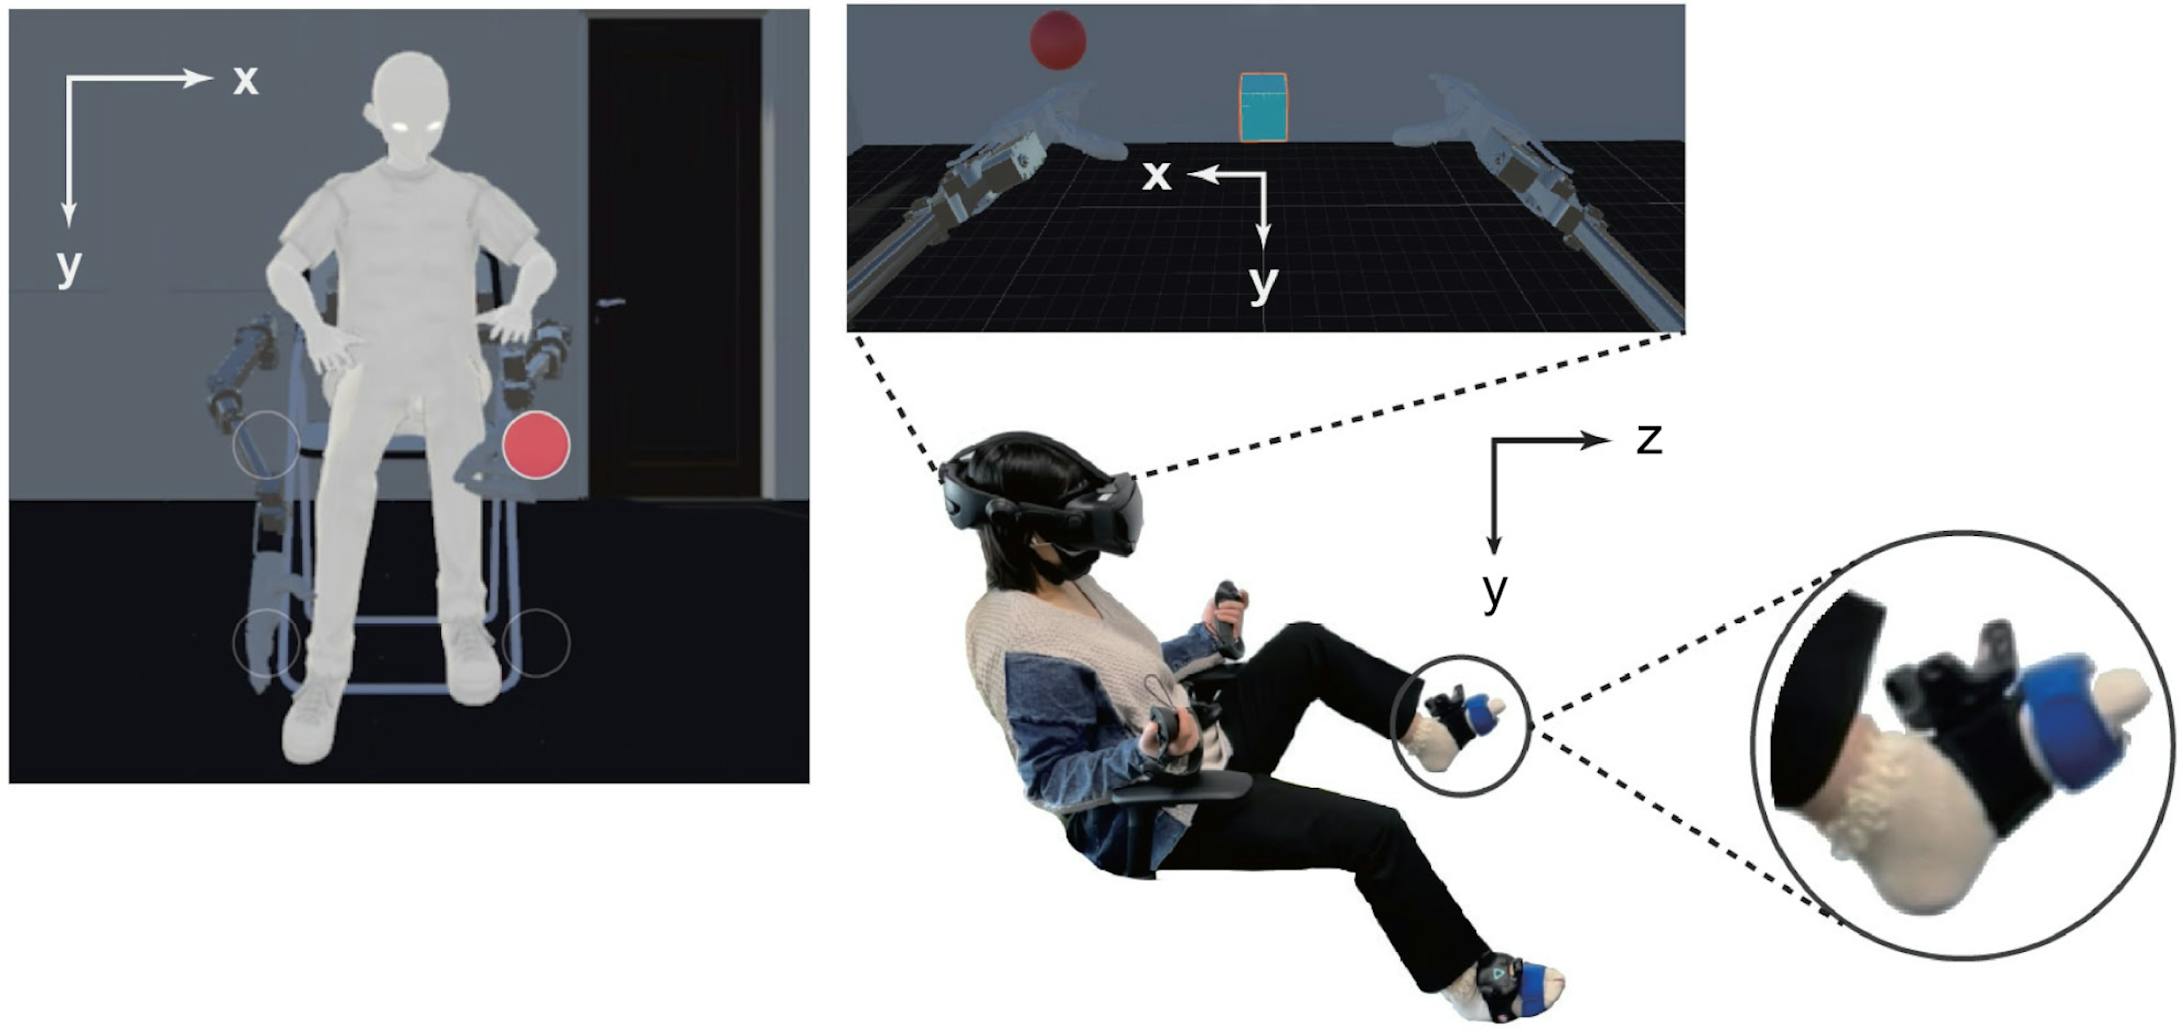 Study Shows That Virtual Robotic Can Feel Like Our Own Bodies - Hackster.io